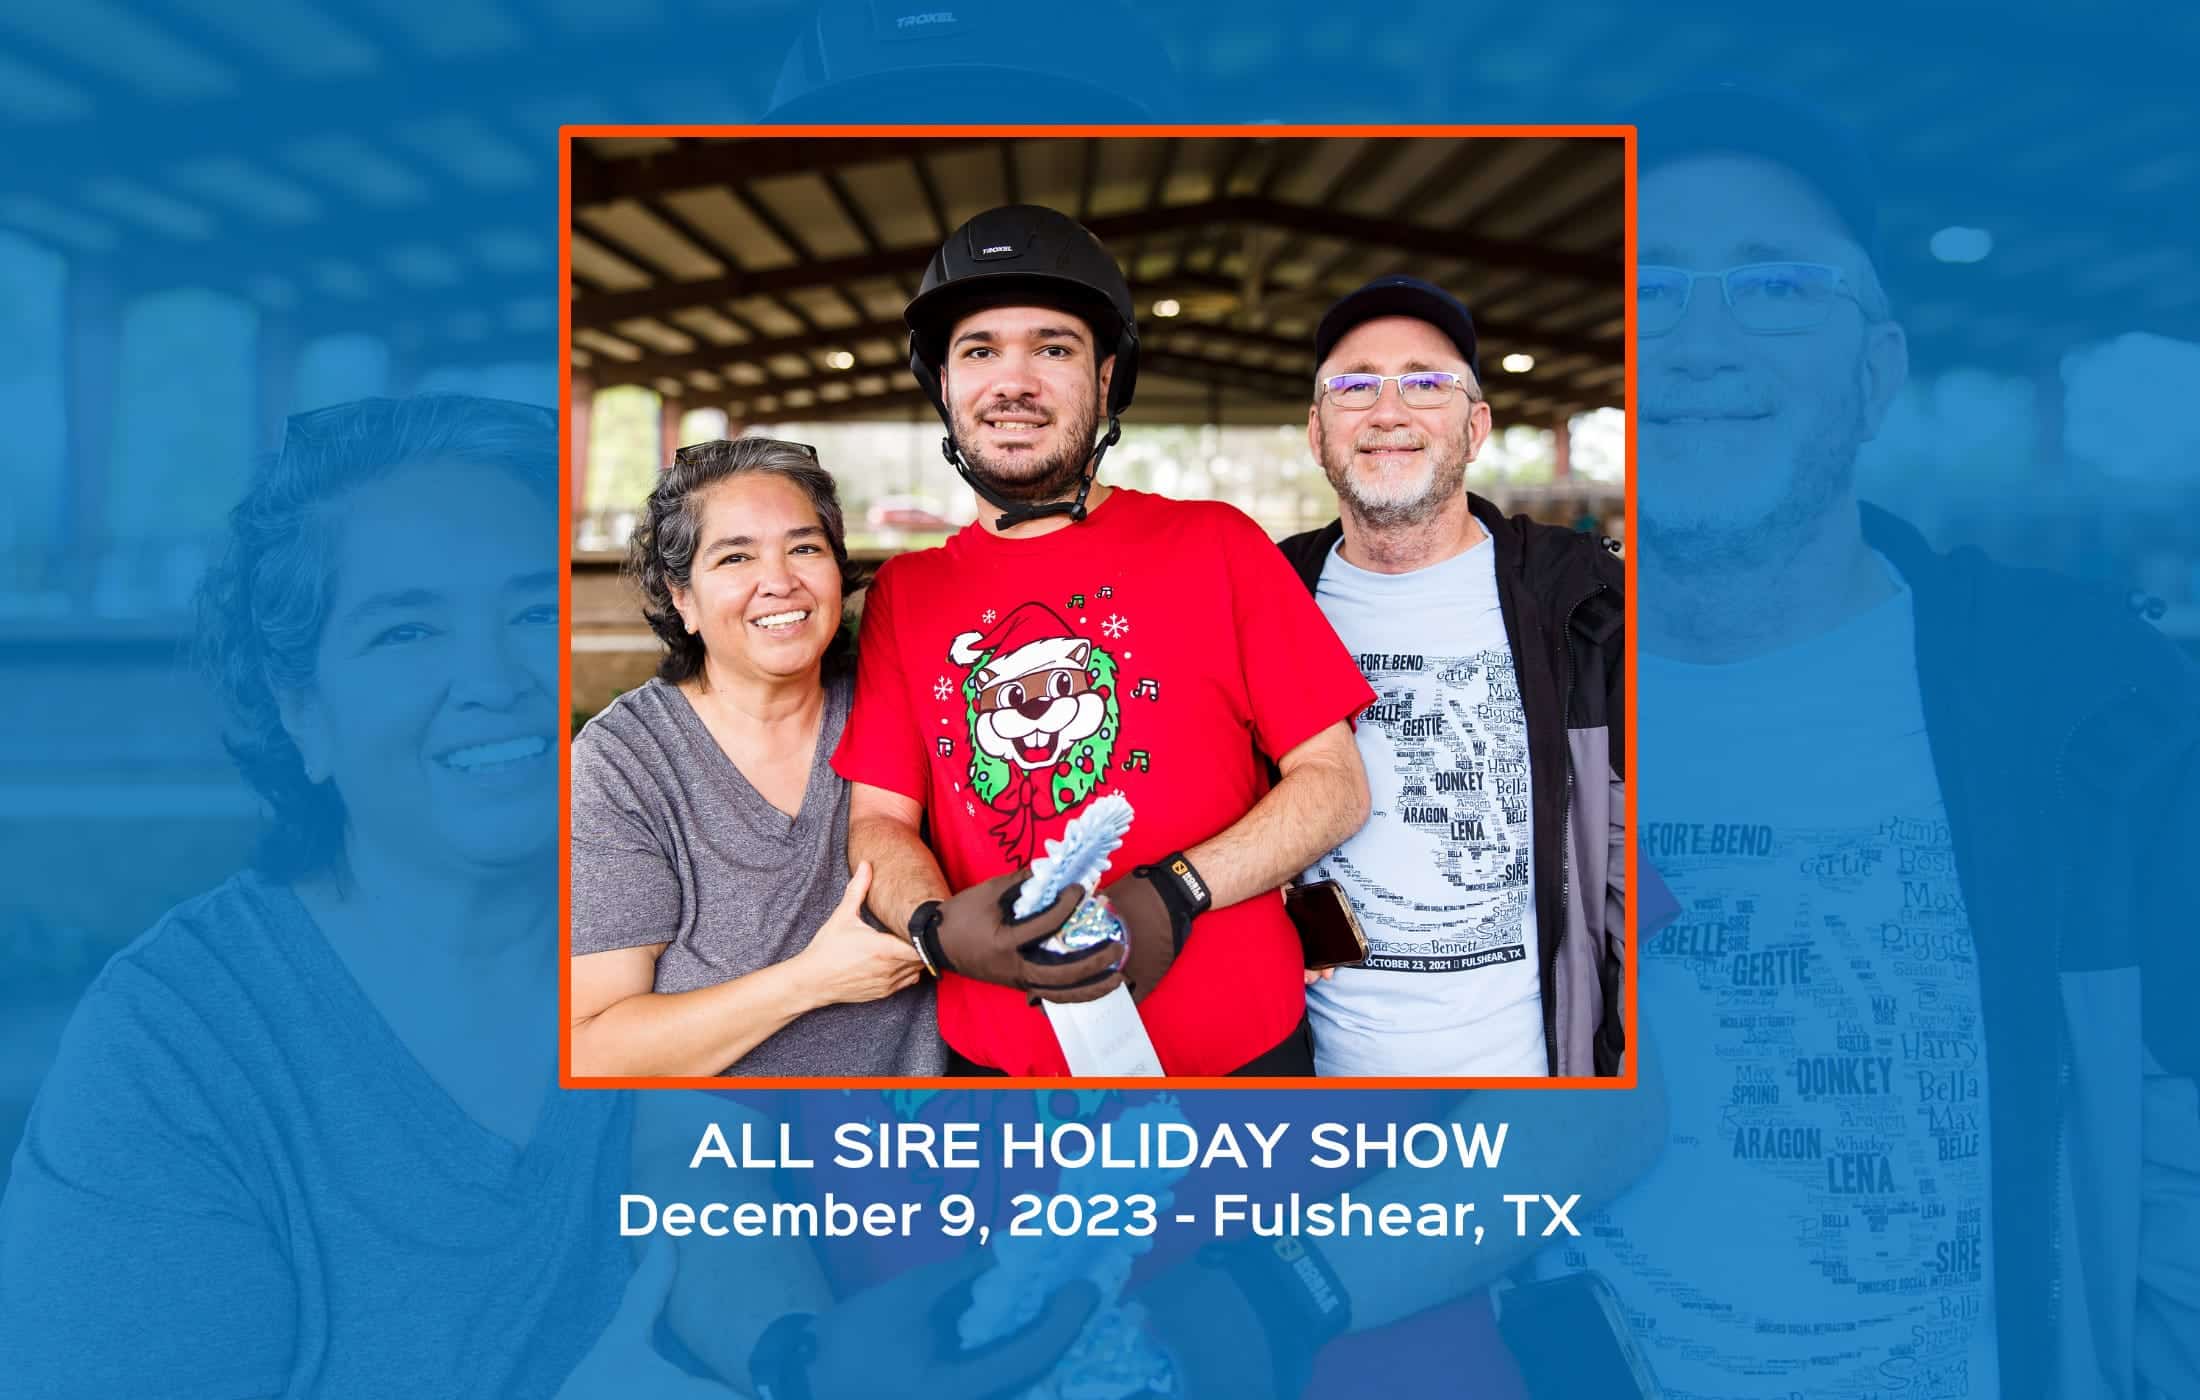 All SIRE Holiday Show